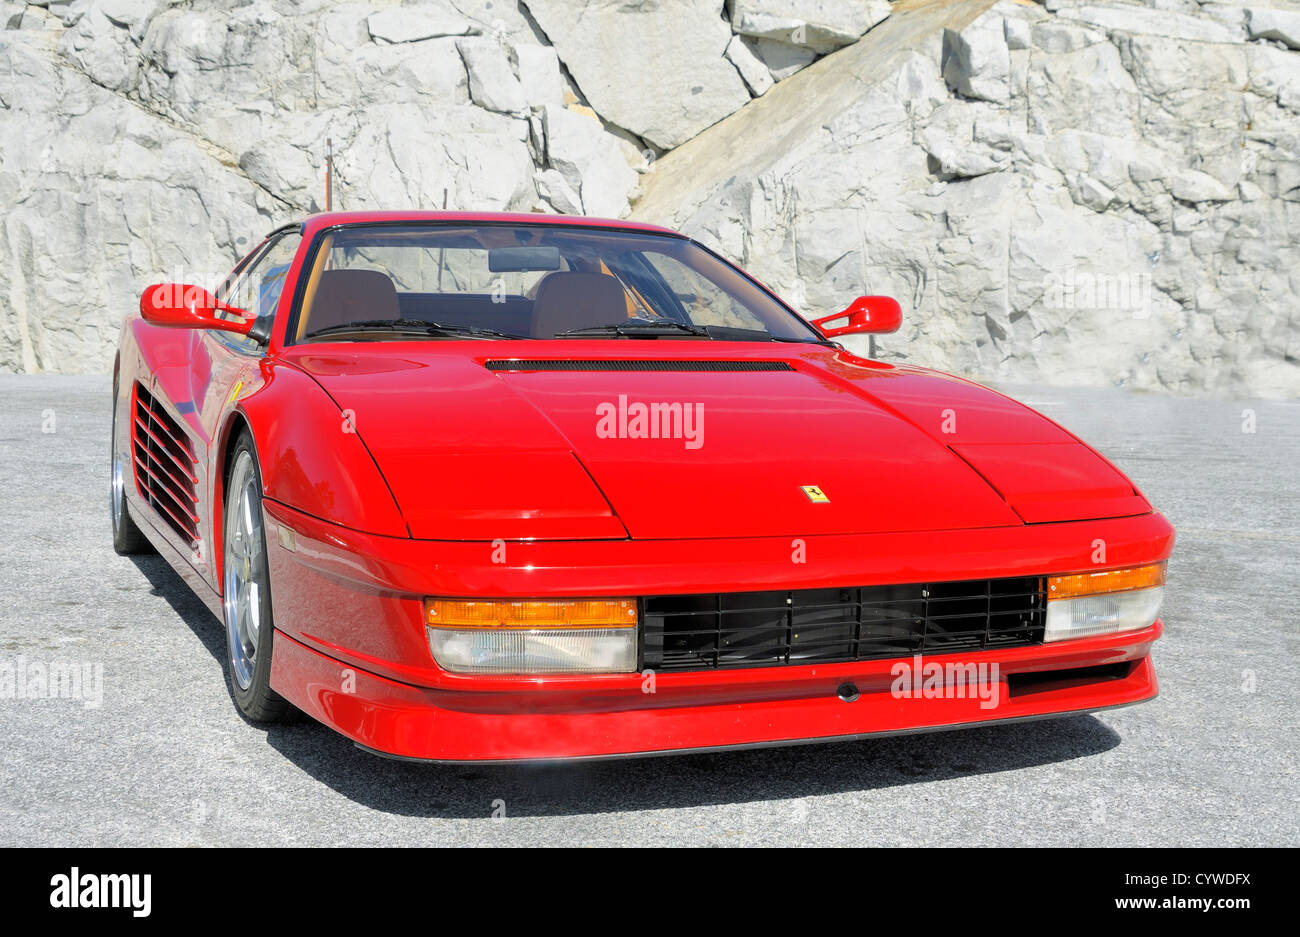 A red Ferrari Testarossa, a 12-cylinder mid-engine sports car. Produced originally in 1984, ten thousand unit were sold. Stock Photo